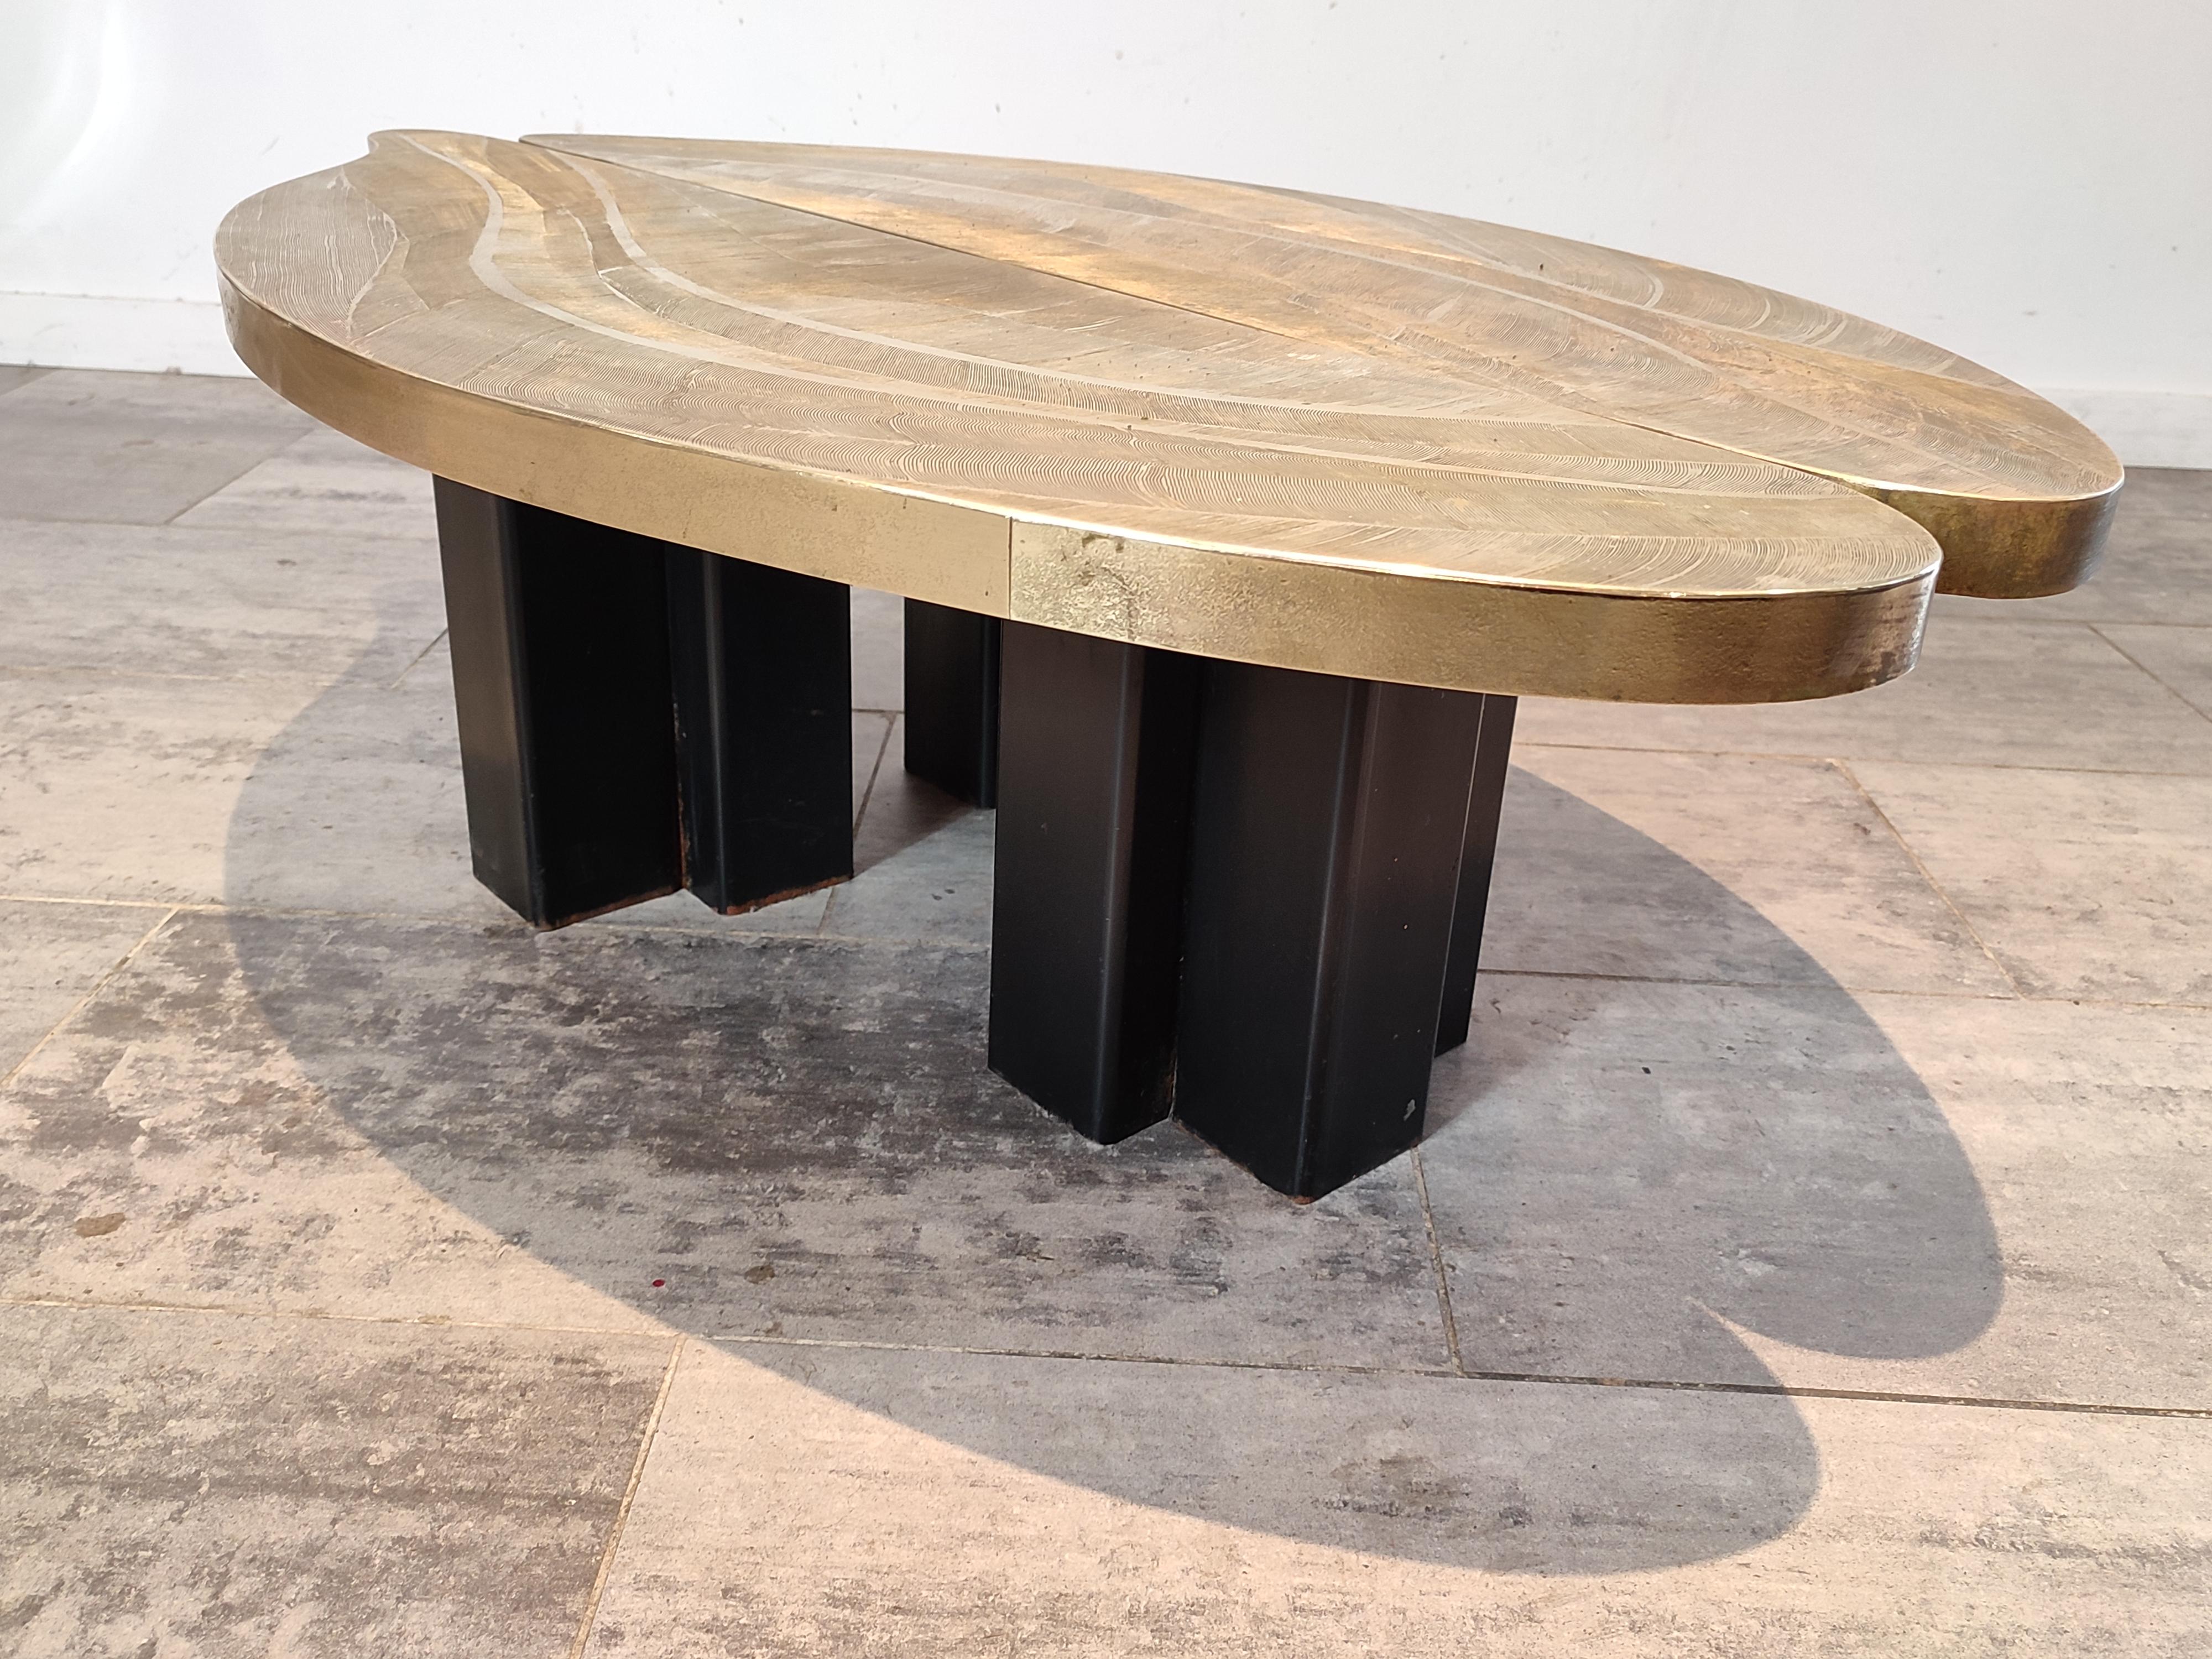 Marc Fourdin made very special tables, he also exposed together with Christian Krekels in the famous coast region 